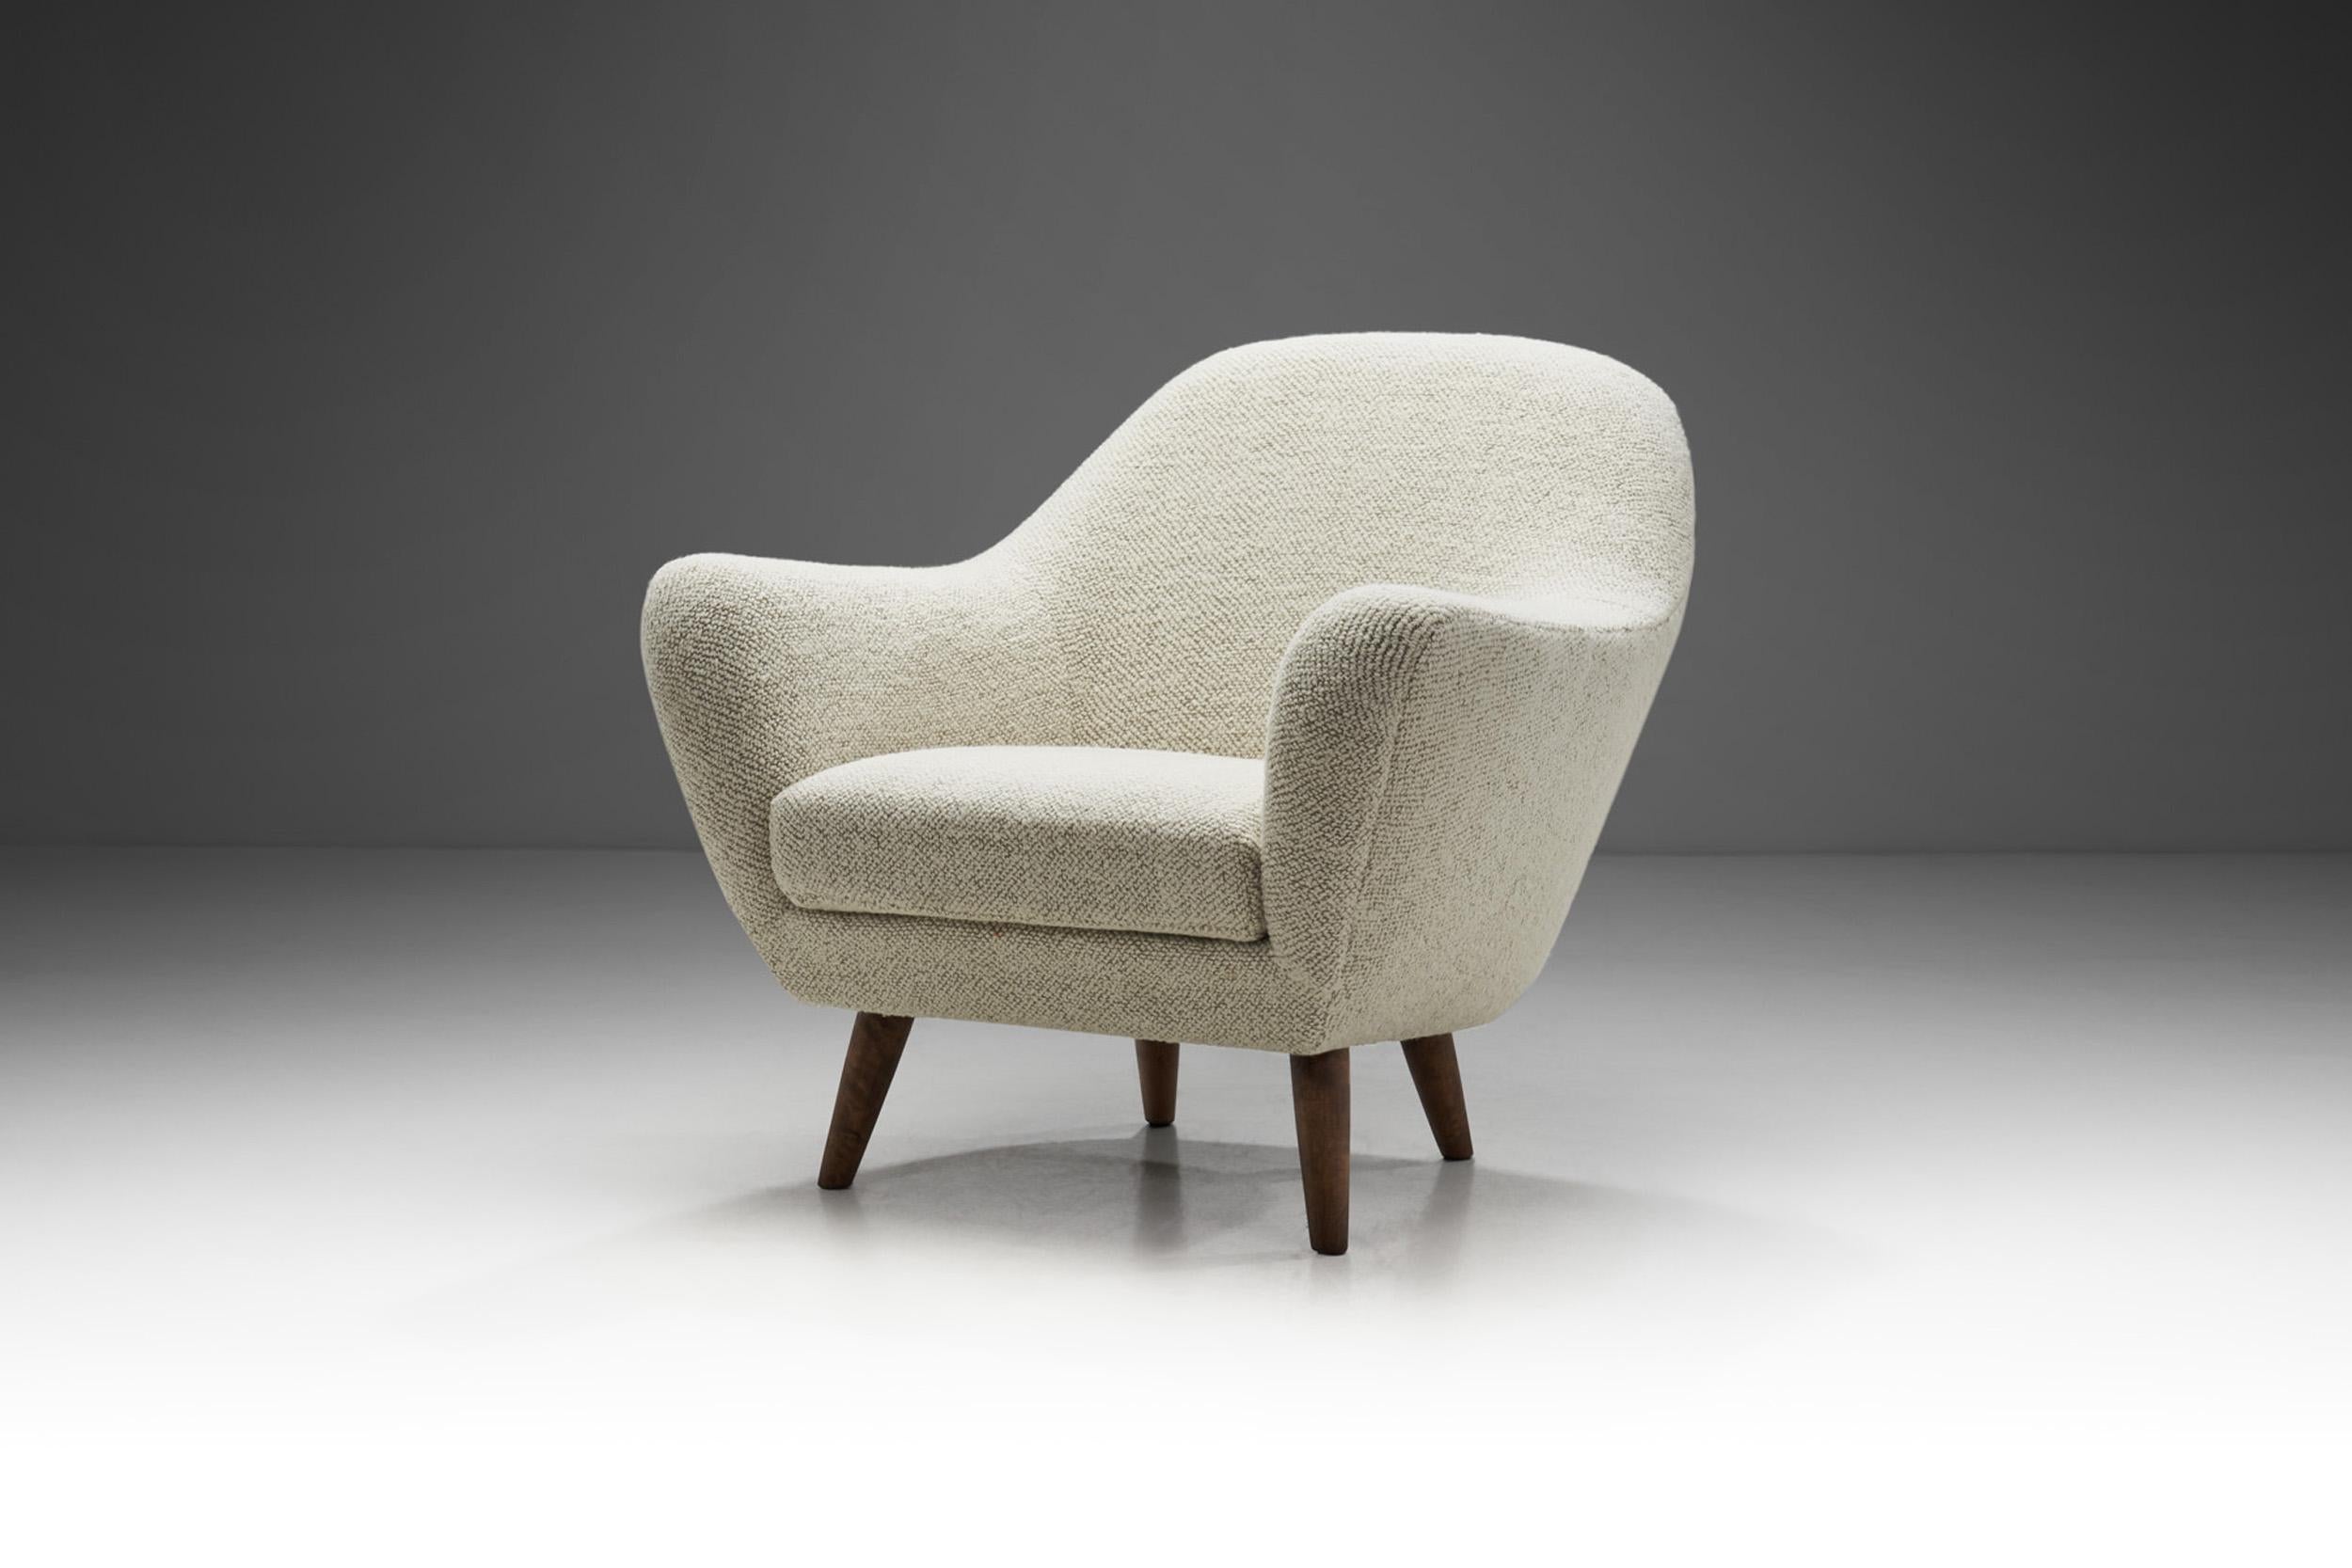 This pleasantly elegant armchair - together with a sofa - is from the “Chile” series by Swedish designer, Svante Skogh. His seating designs are exceedingly rare, especially the “Chile” series, making this chair all the more special from a design